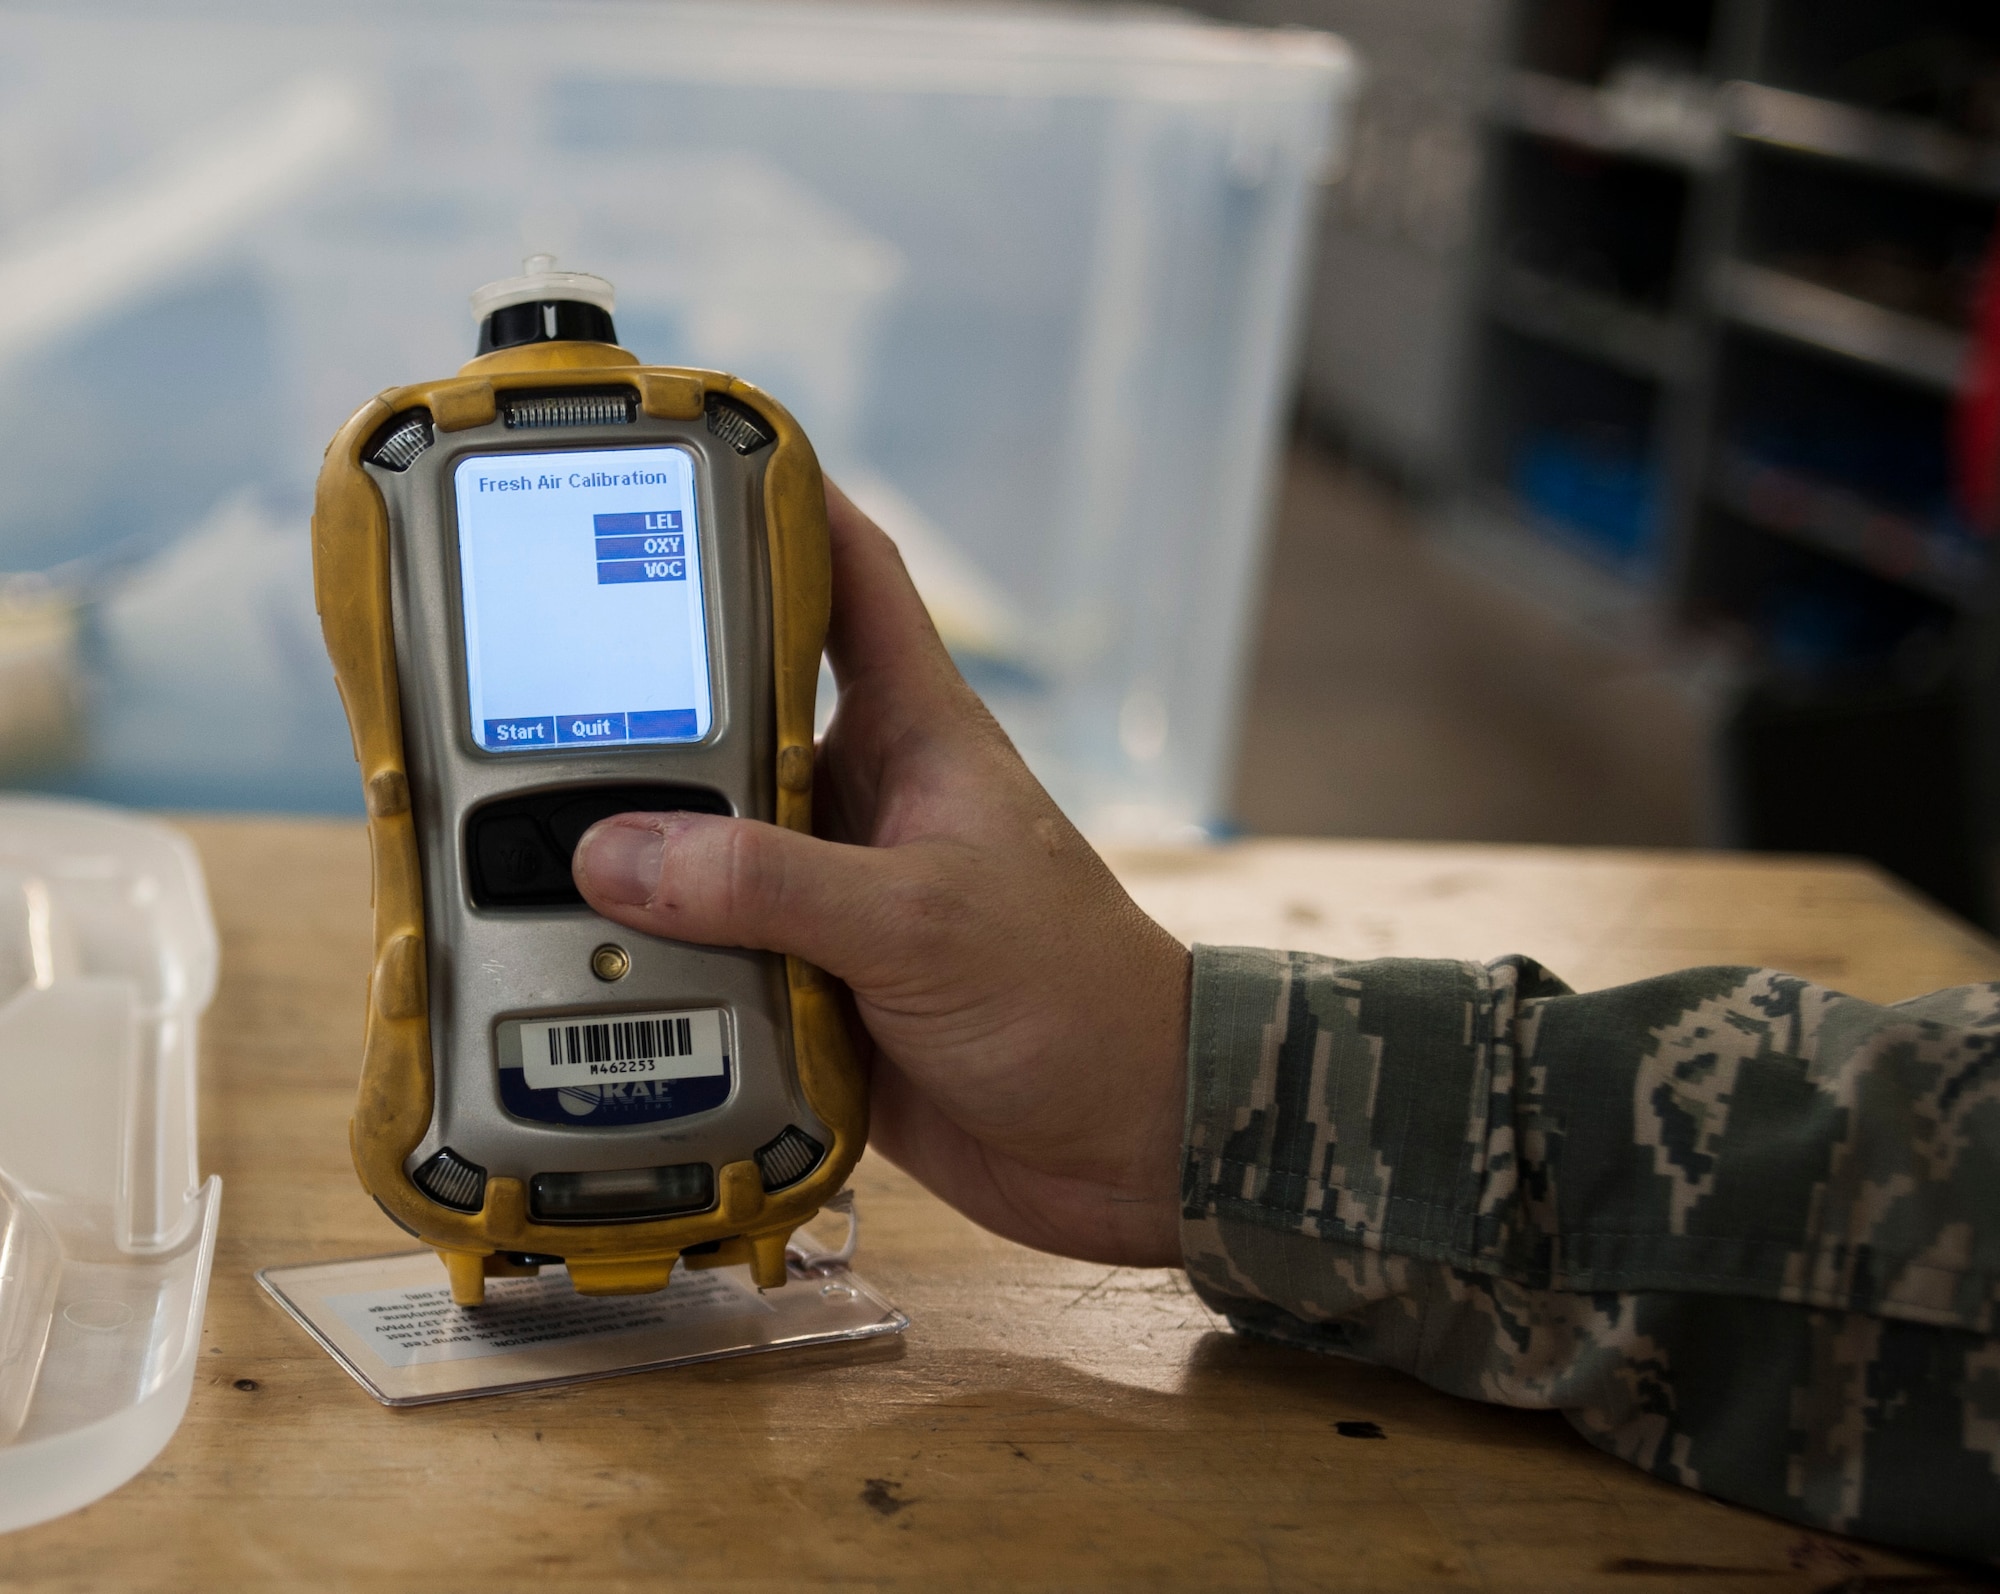 U.S. Air Force Staff Sgt. Adrian Gonzalez, an aircraft fuel systems craftsman assigned to the 6th Maintenance Squadron calibrates a photoionization detector used during fuel systems maintenance at MacDill Air Force Base, Fla., May 30, 2018.